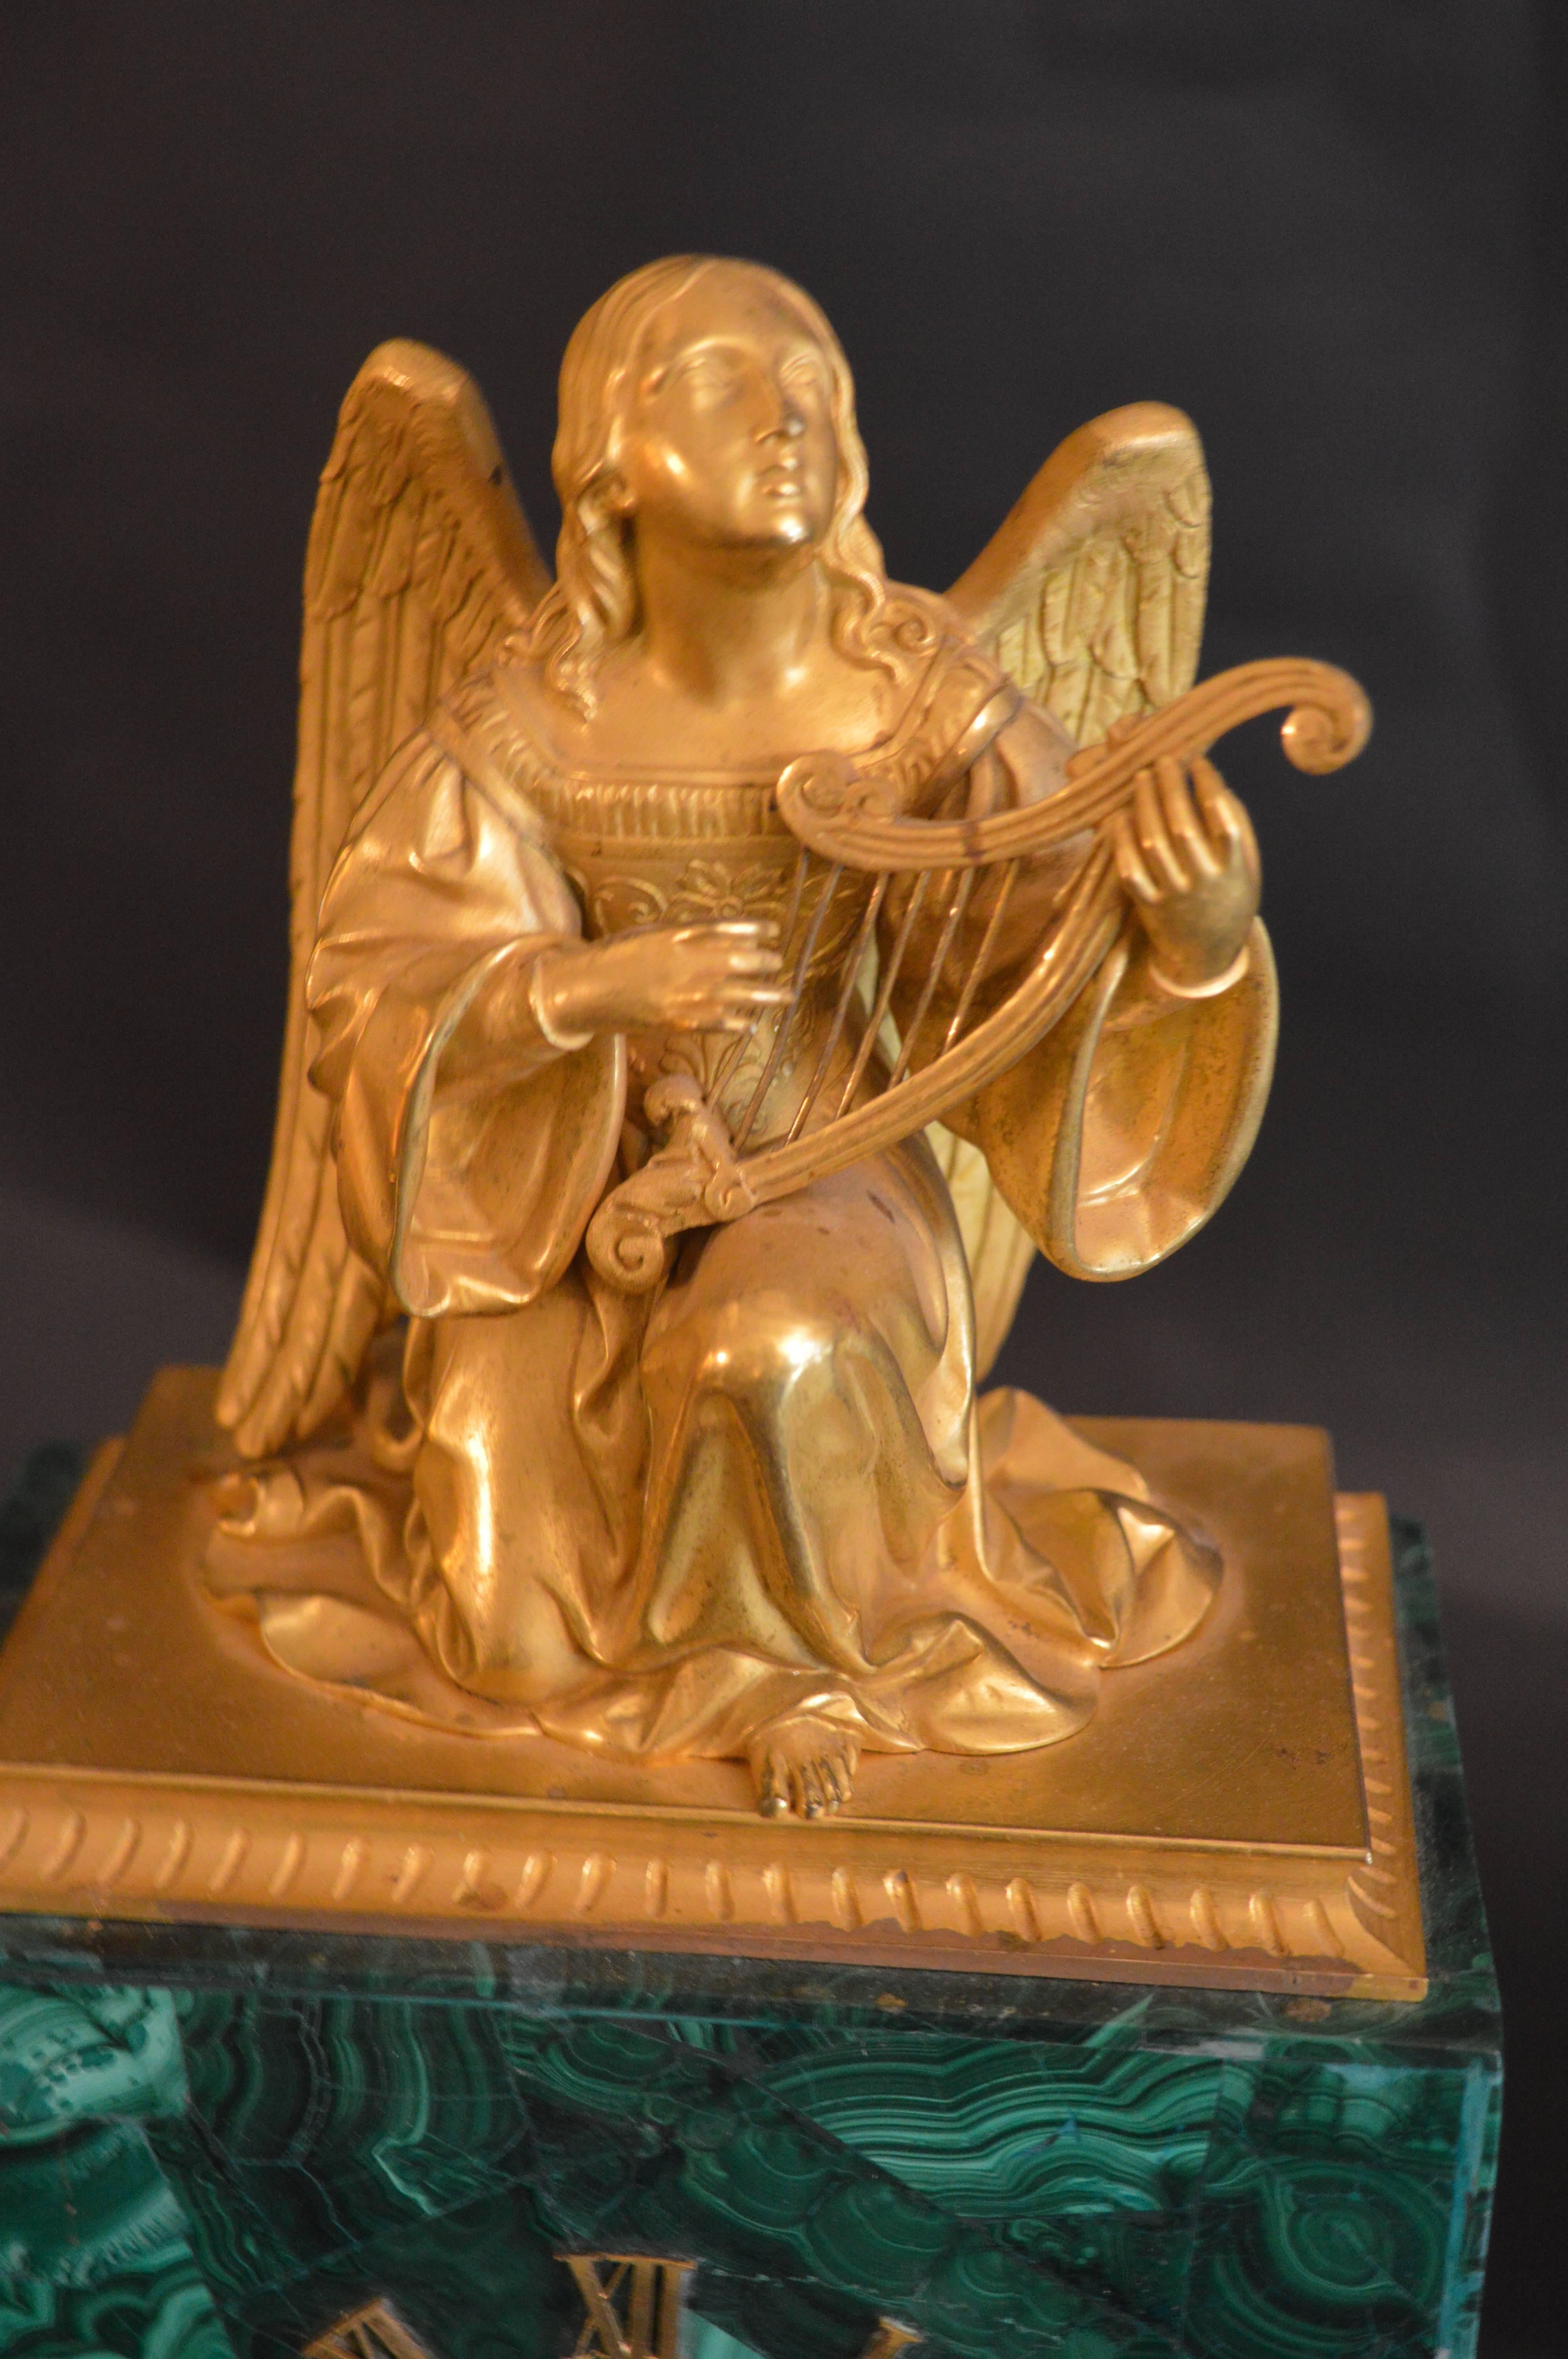 Malachite clock with gilded angel on top.